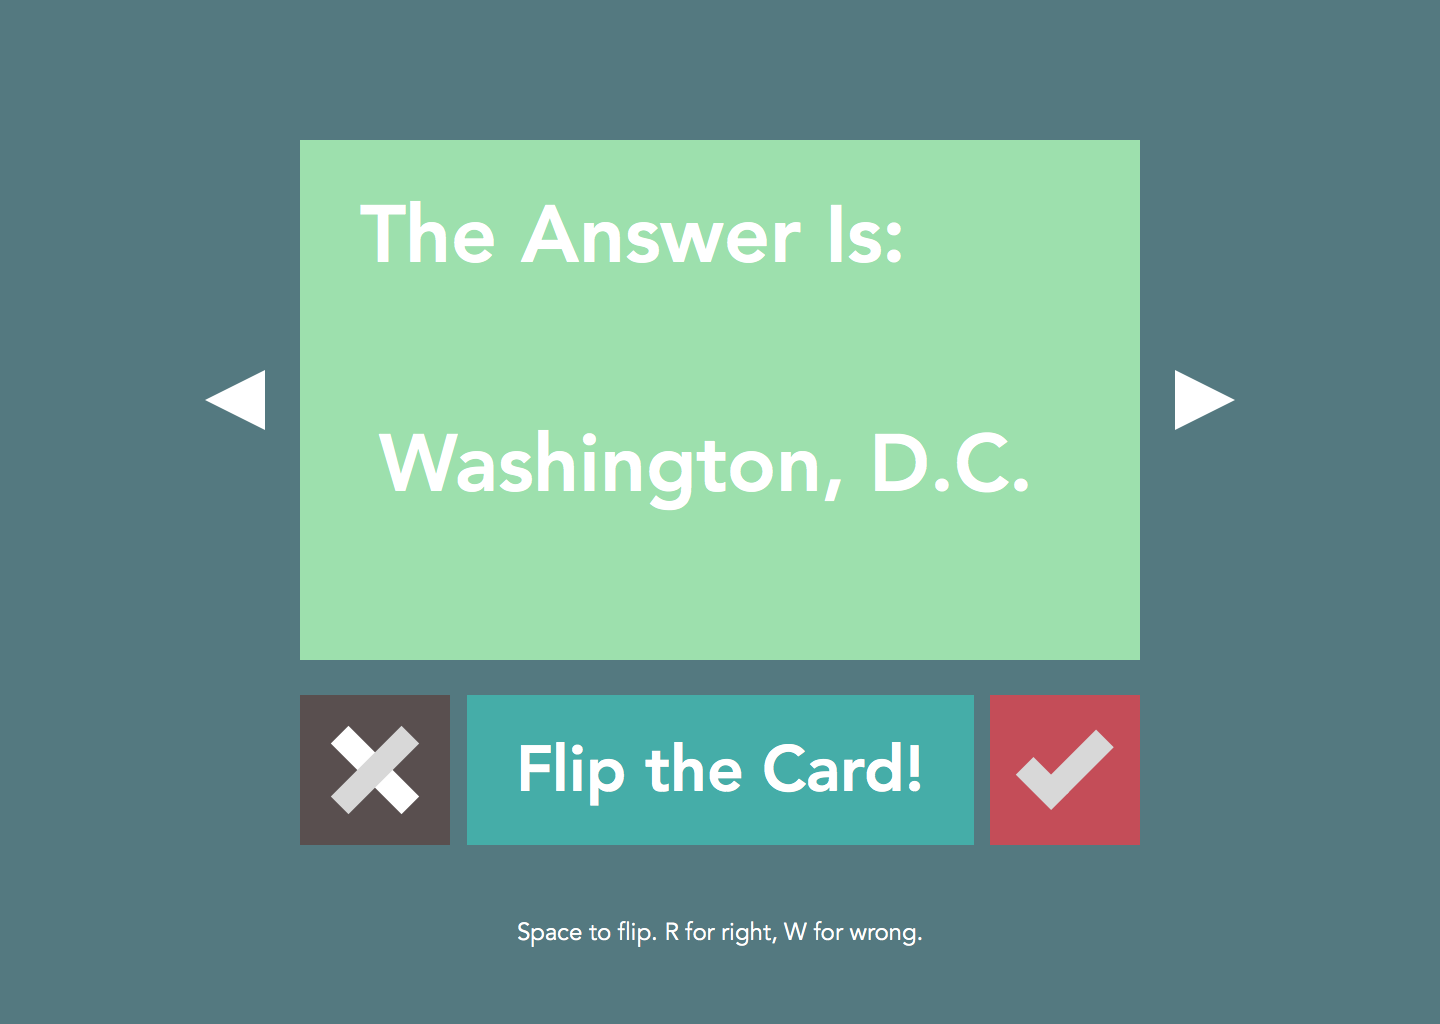 The updated answer card design, with arrows.